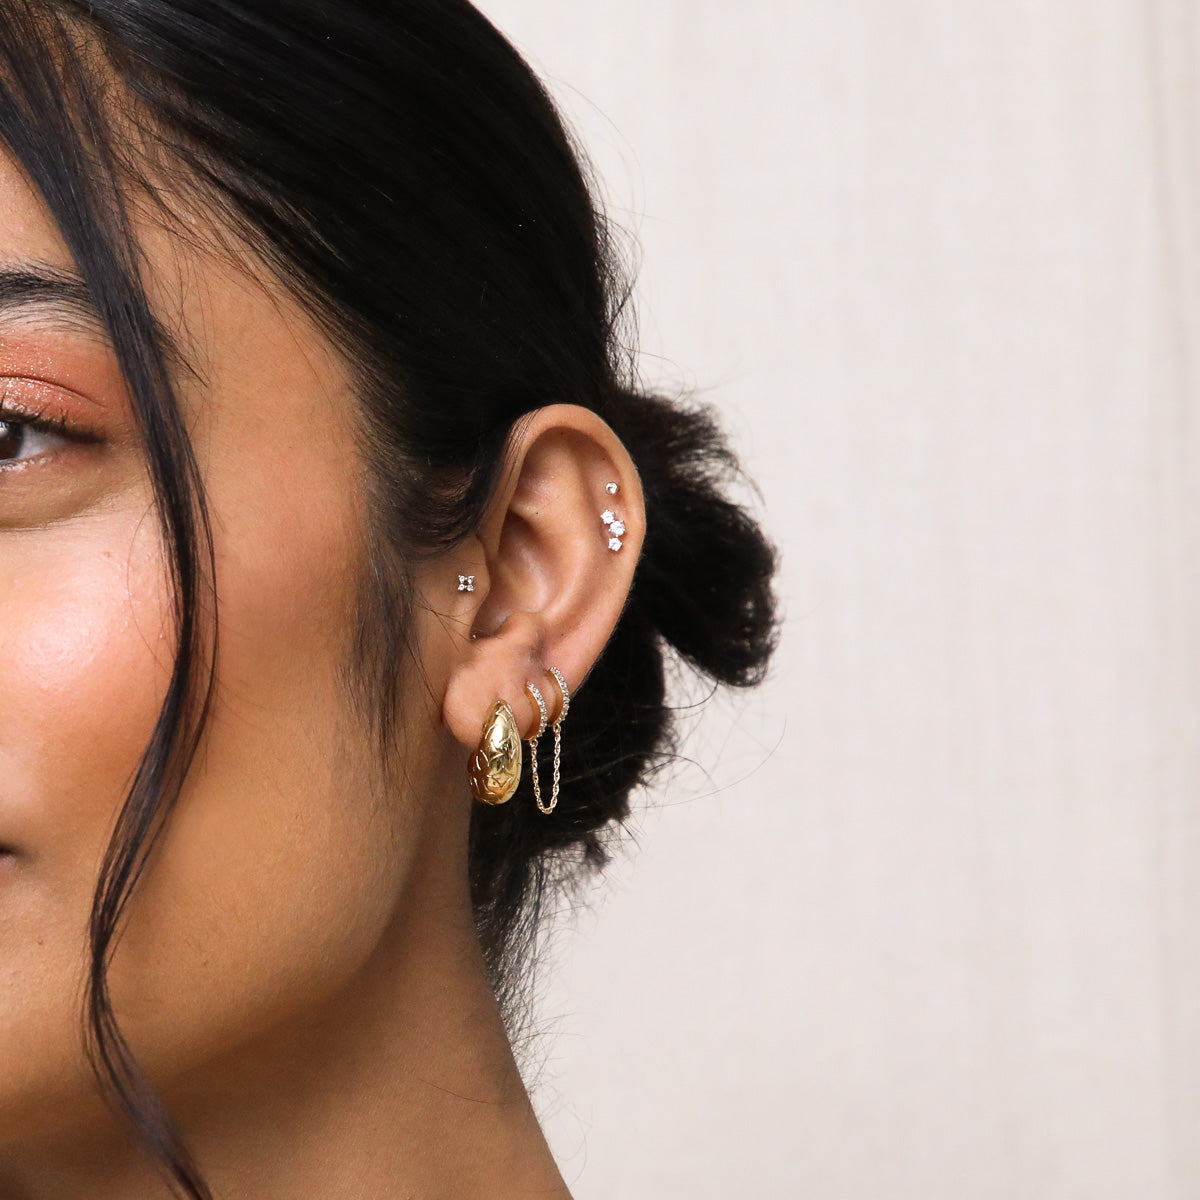 Cosmic Star Large Hoops in Gold worn stacked with other earrings